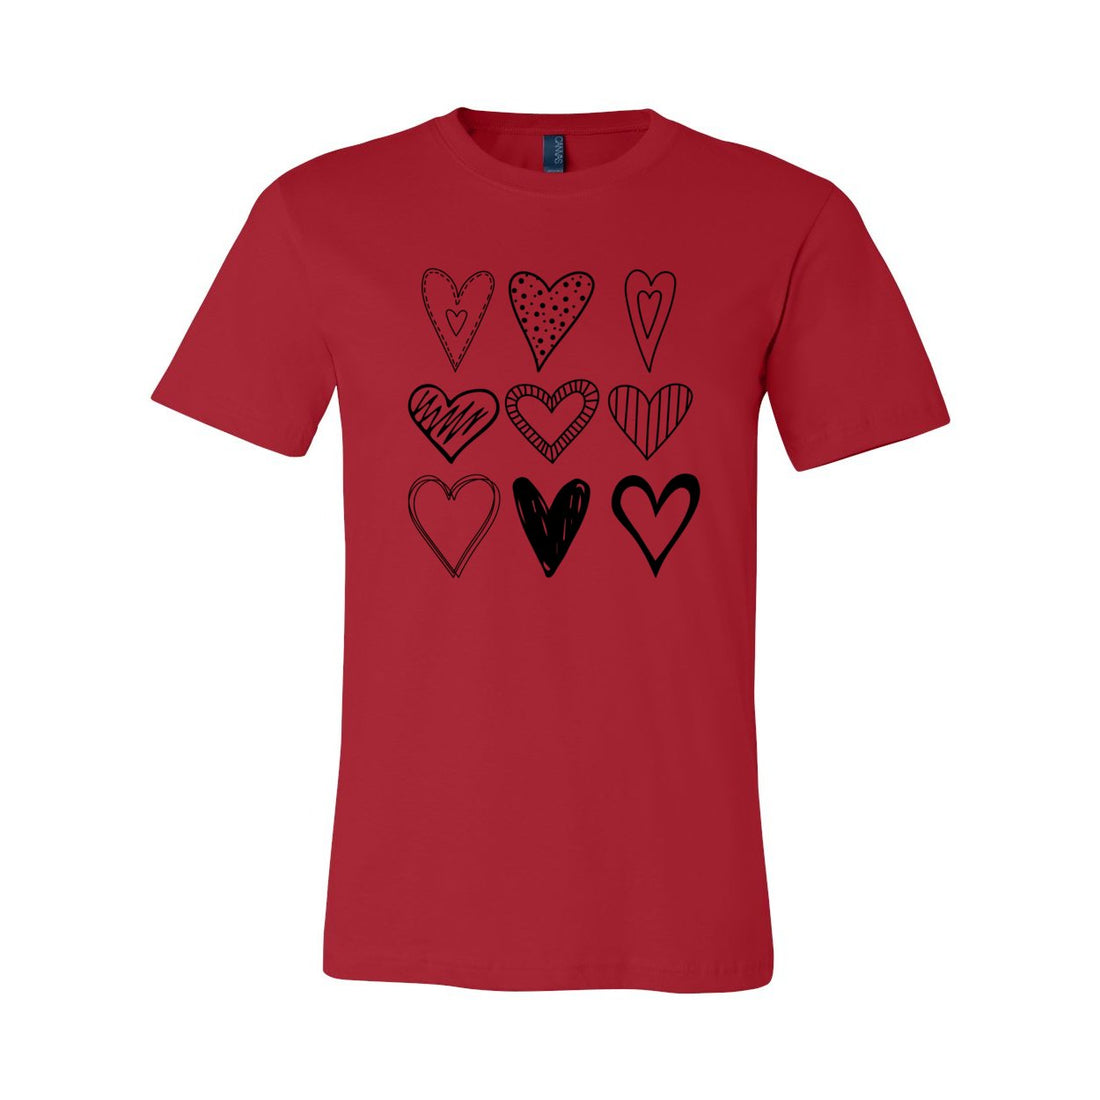 Square Hearts Love Short Sleeve Jersey Tee - T-Shirts - Positively Sassy - Square Hearts Love Short Sleeve Jersey Tee